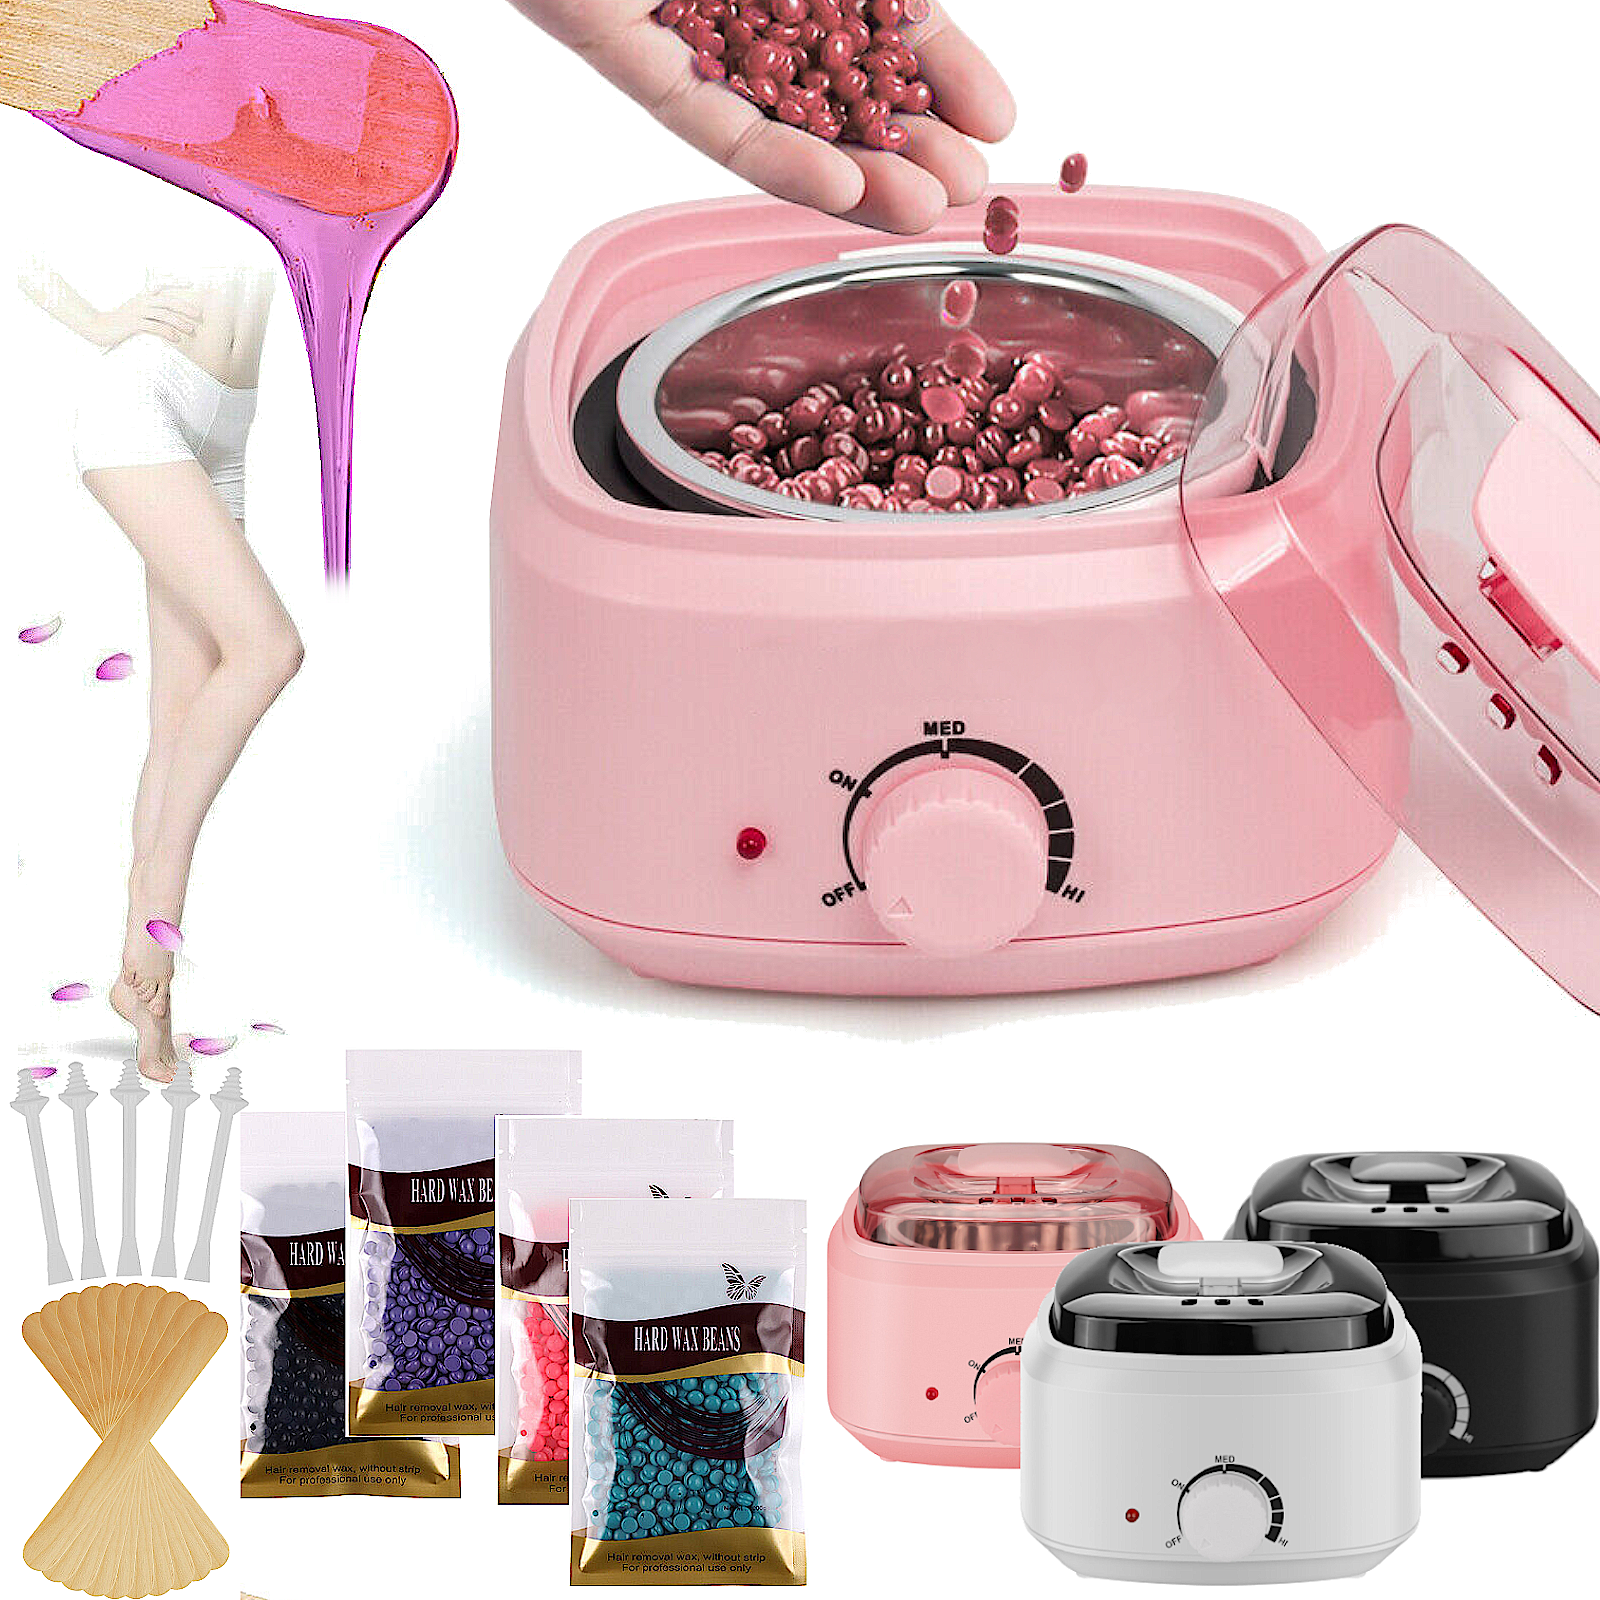 Pink Wax Melt Warmer Kit for Women Men Hair Removal,Waxing Kit with Wax  Beans